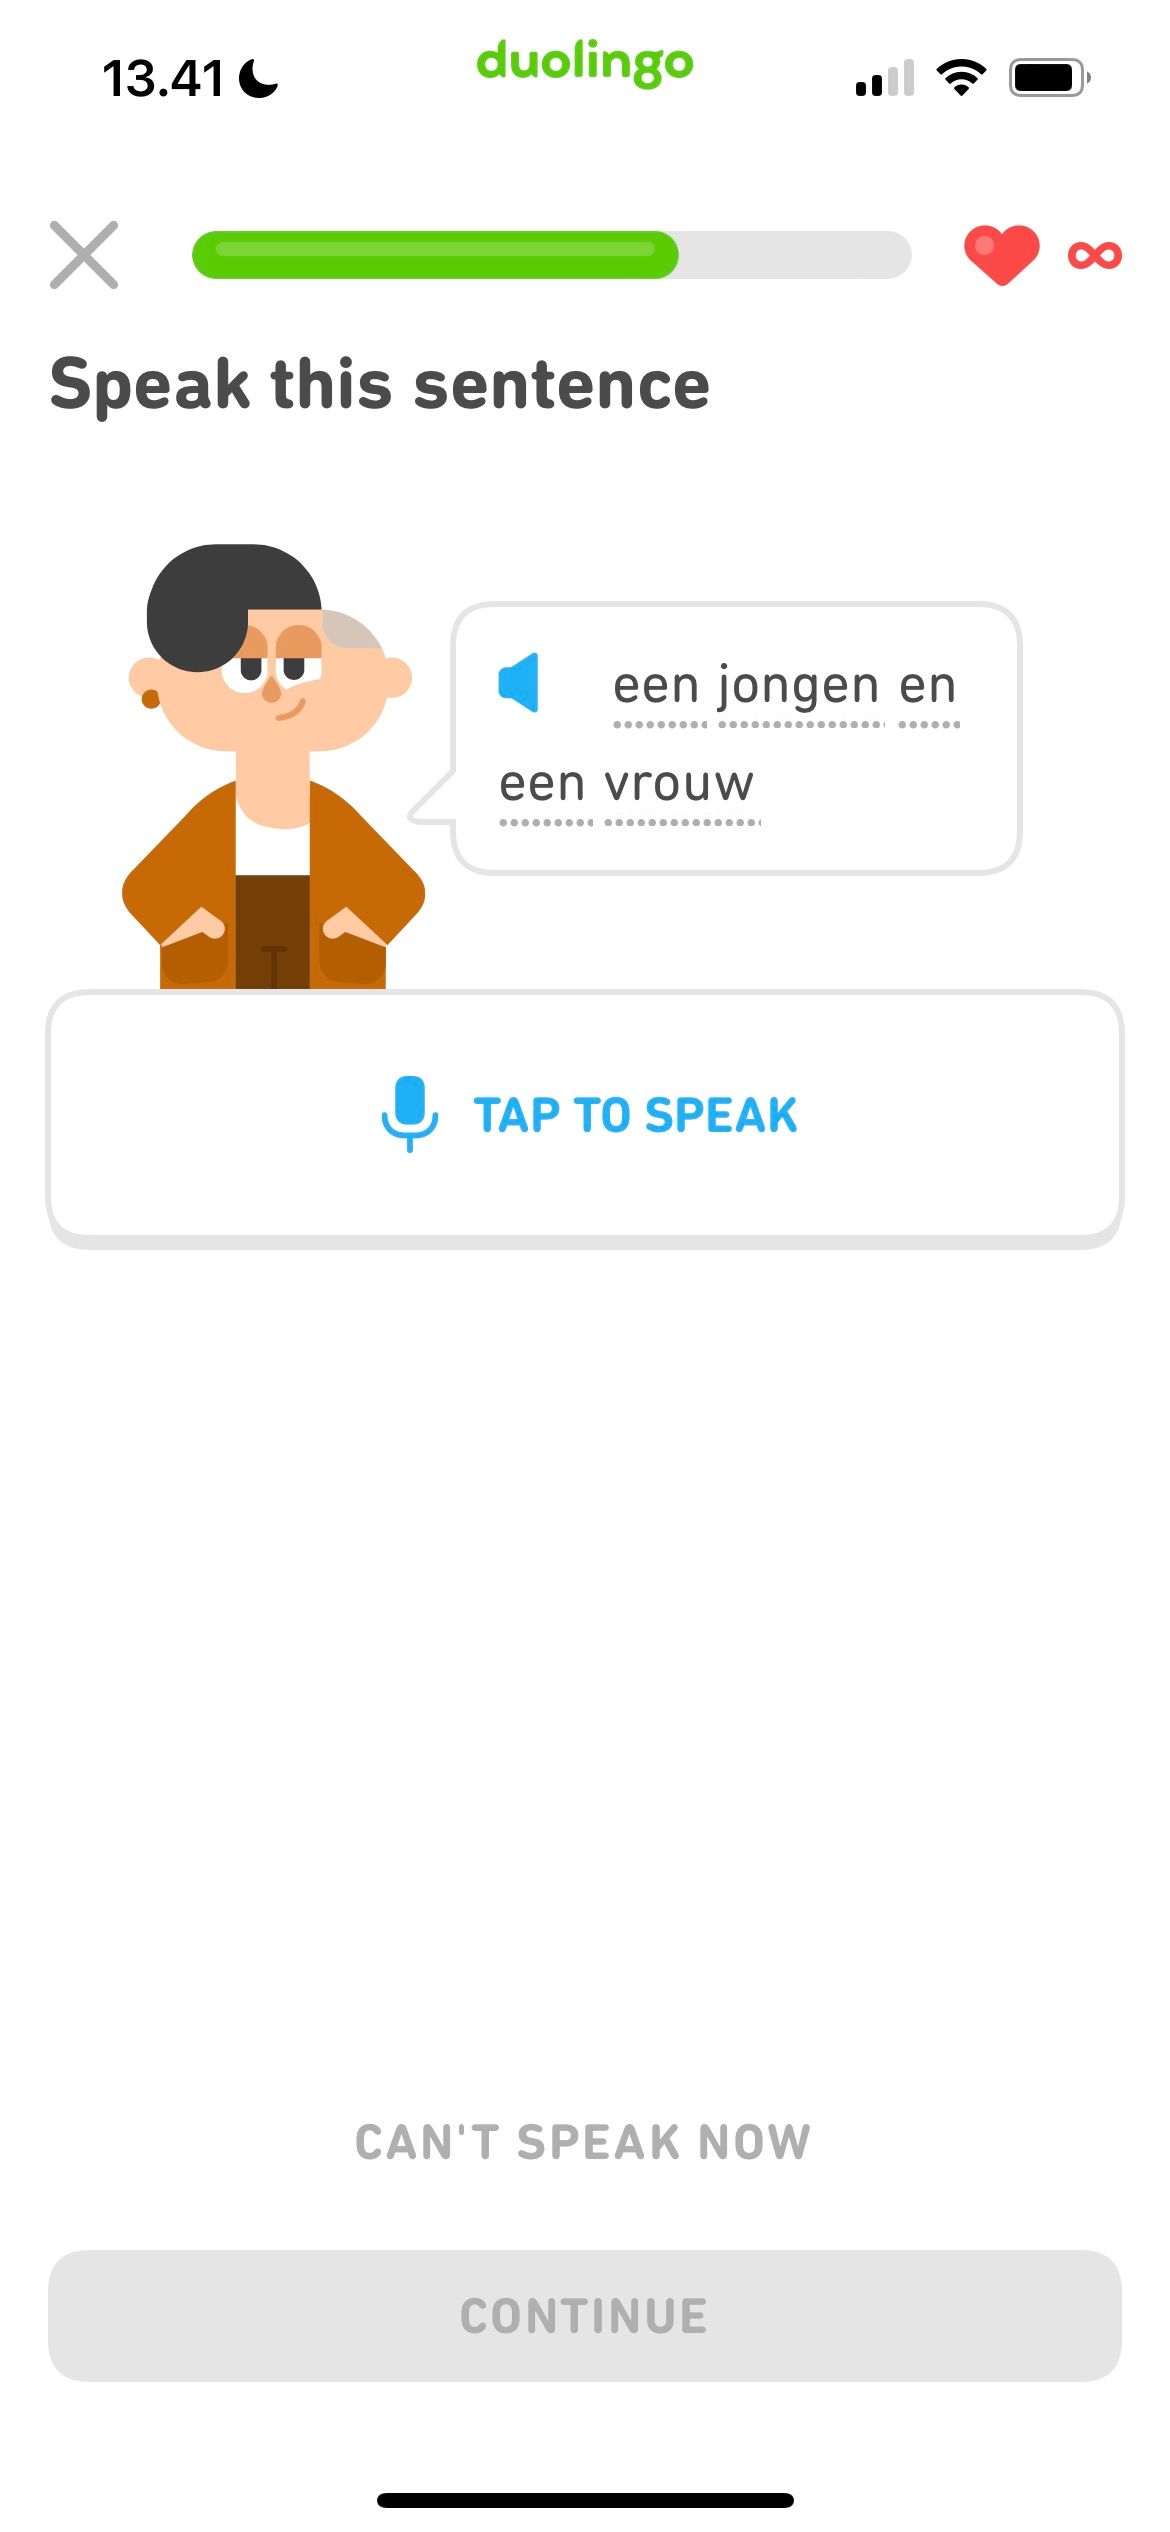 A lesson taking place in Duolingo